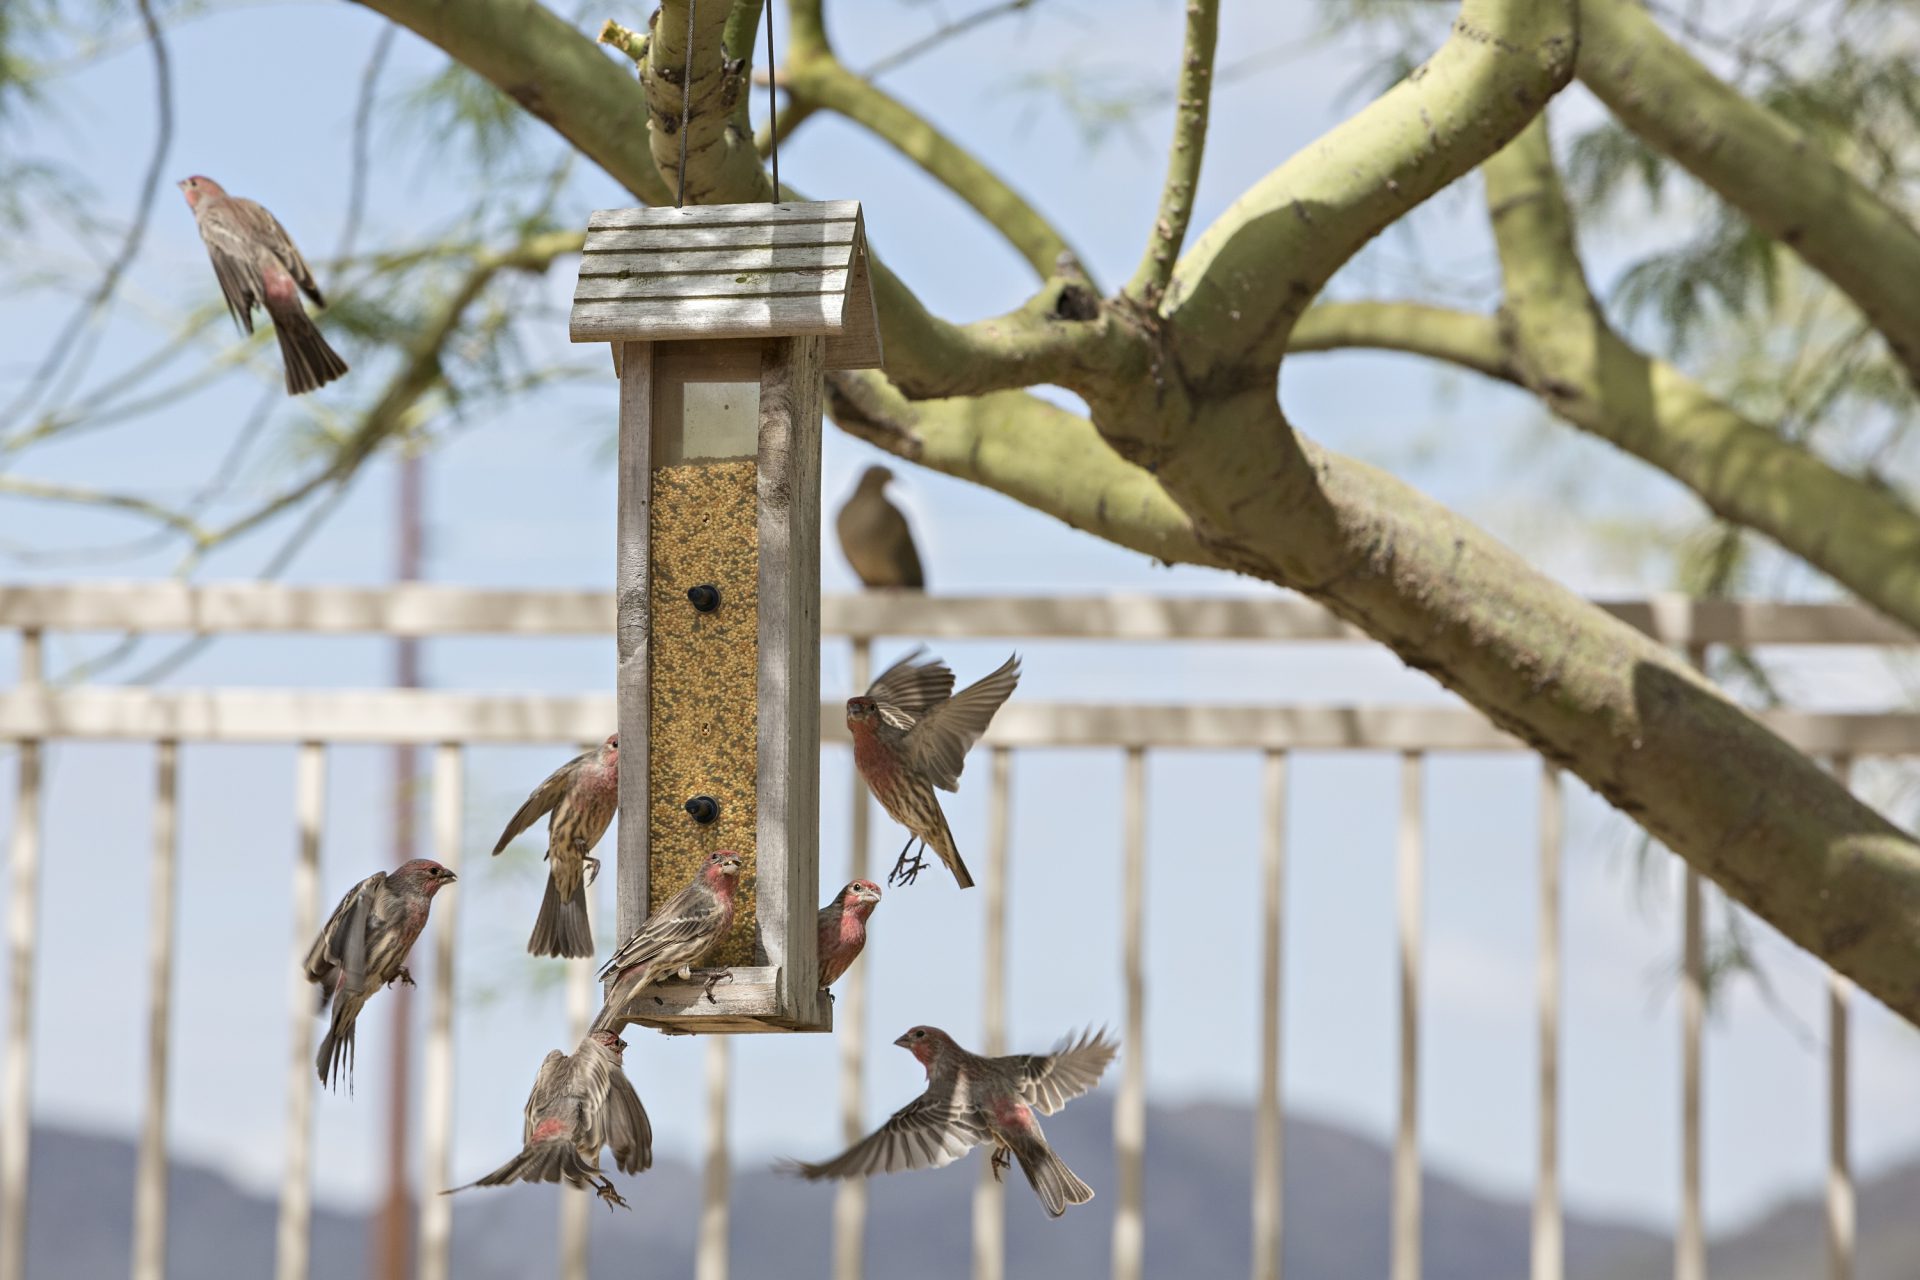 Multiple house finches on feeder